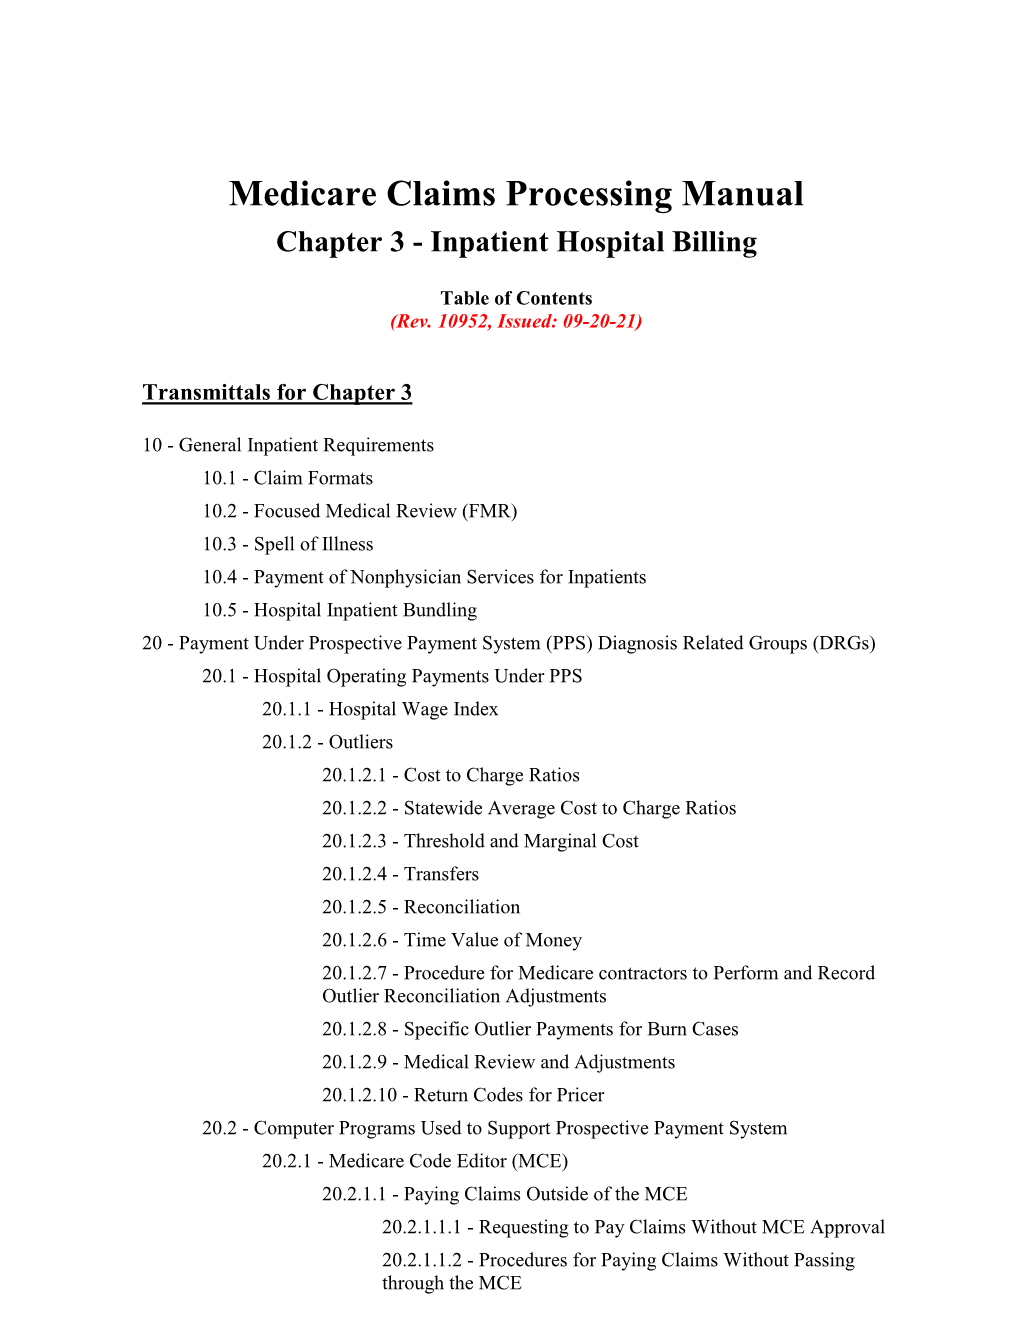 Medicare Claims Processing Manual, Chapter 3, Inpatient Hospital